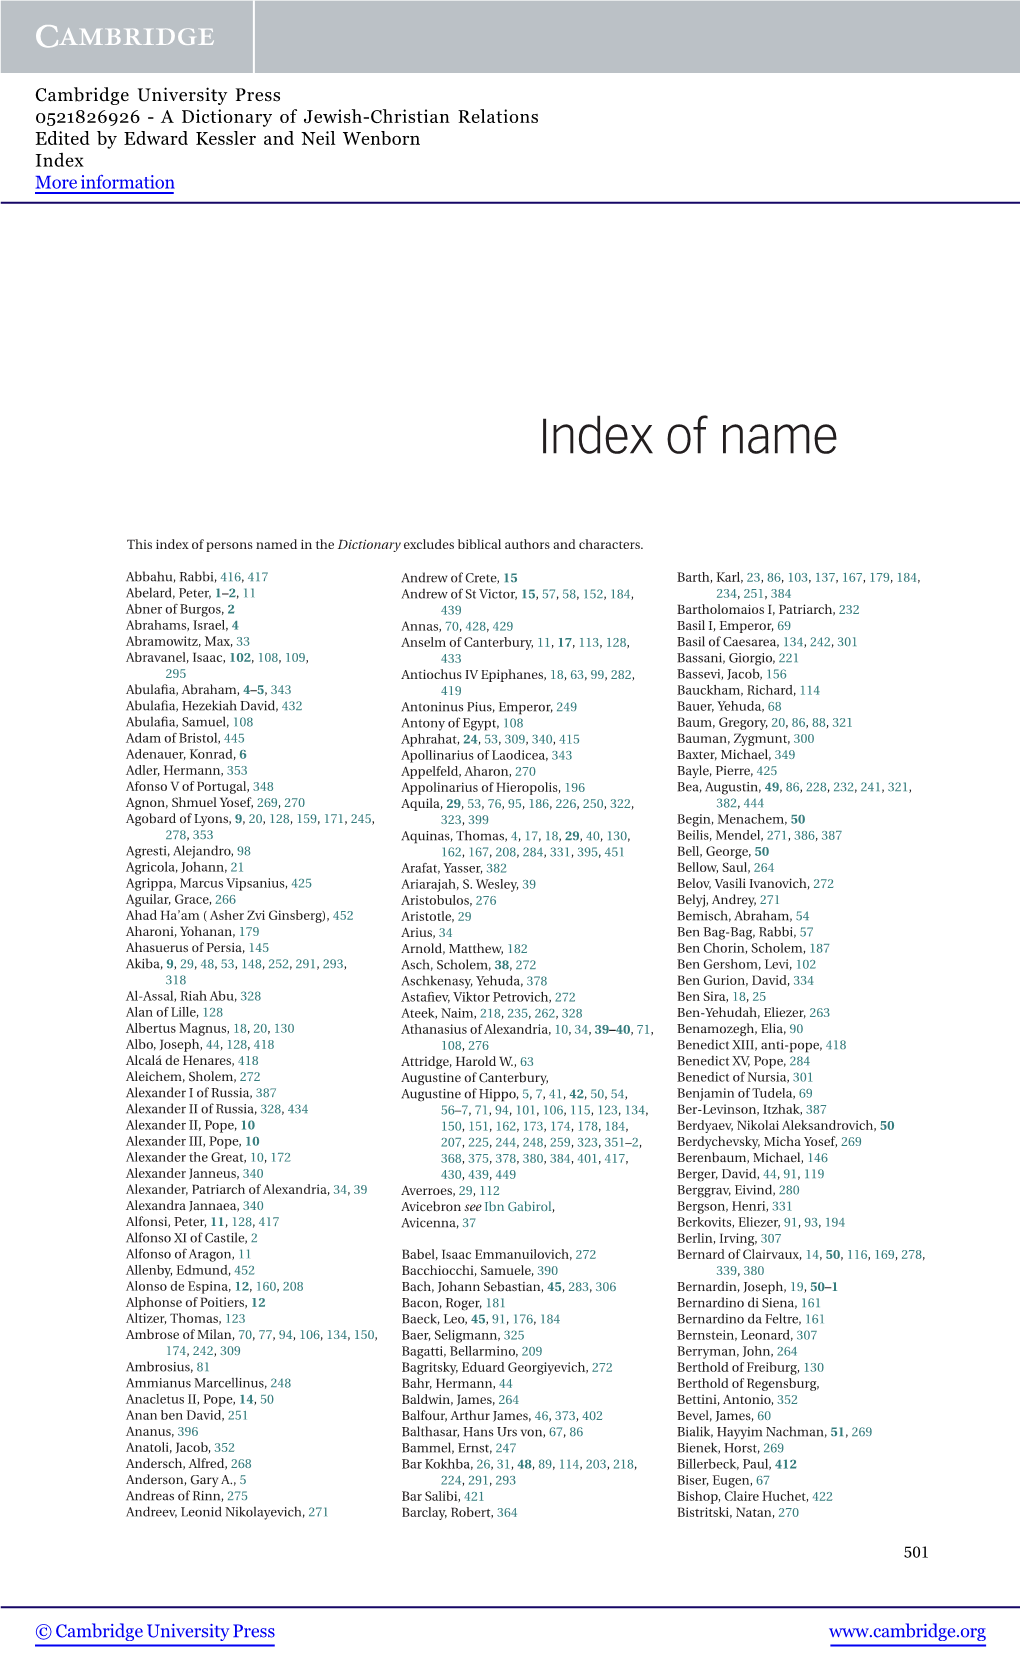 Index of Name